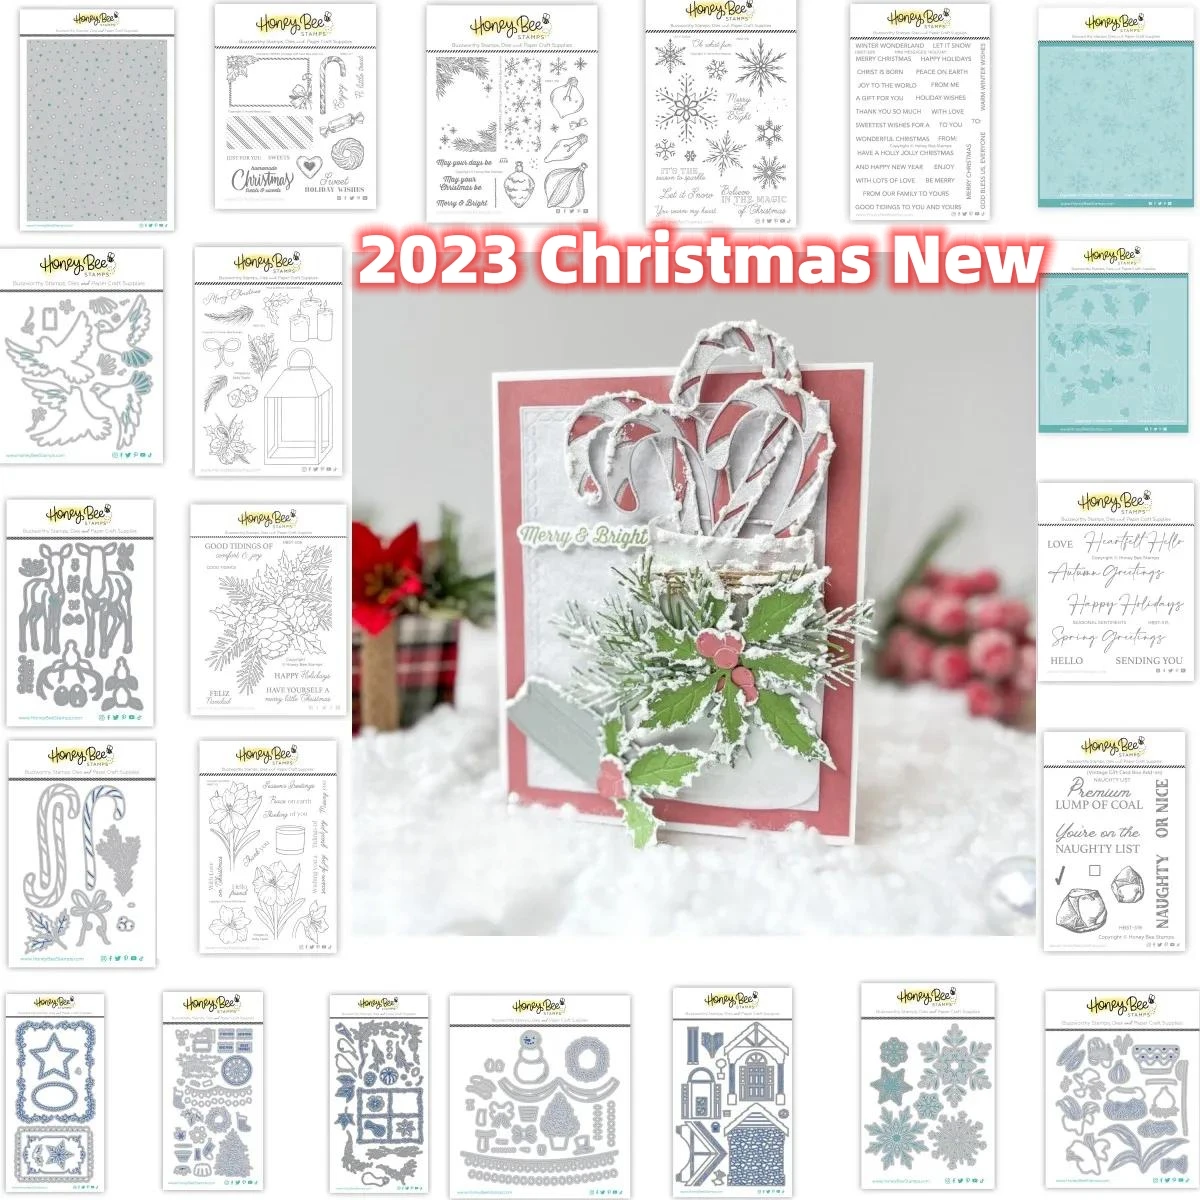 

2023 Winter Christmas Wishes New Metal Cutting Dies Clear Stamps Stencil For Scrapbook Diary Cut Template DIY Make Card Album